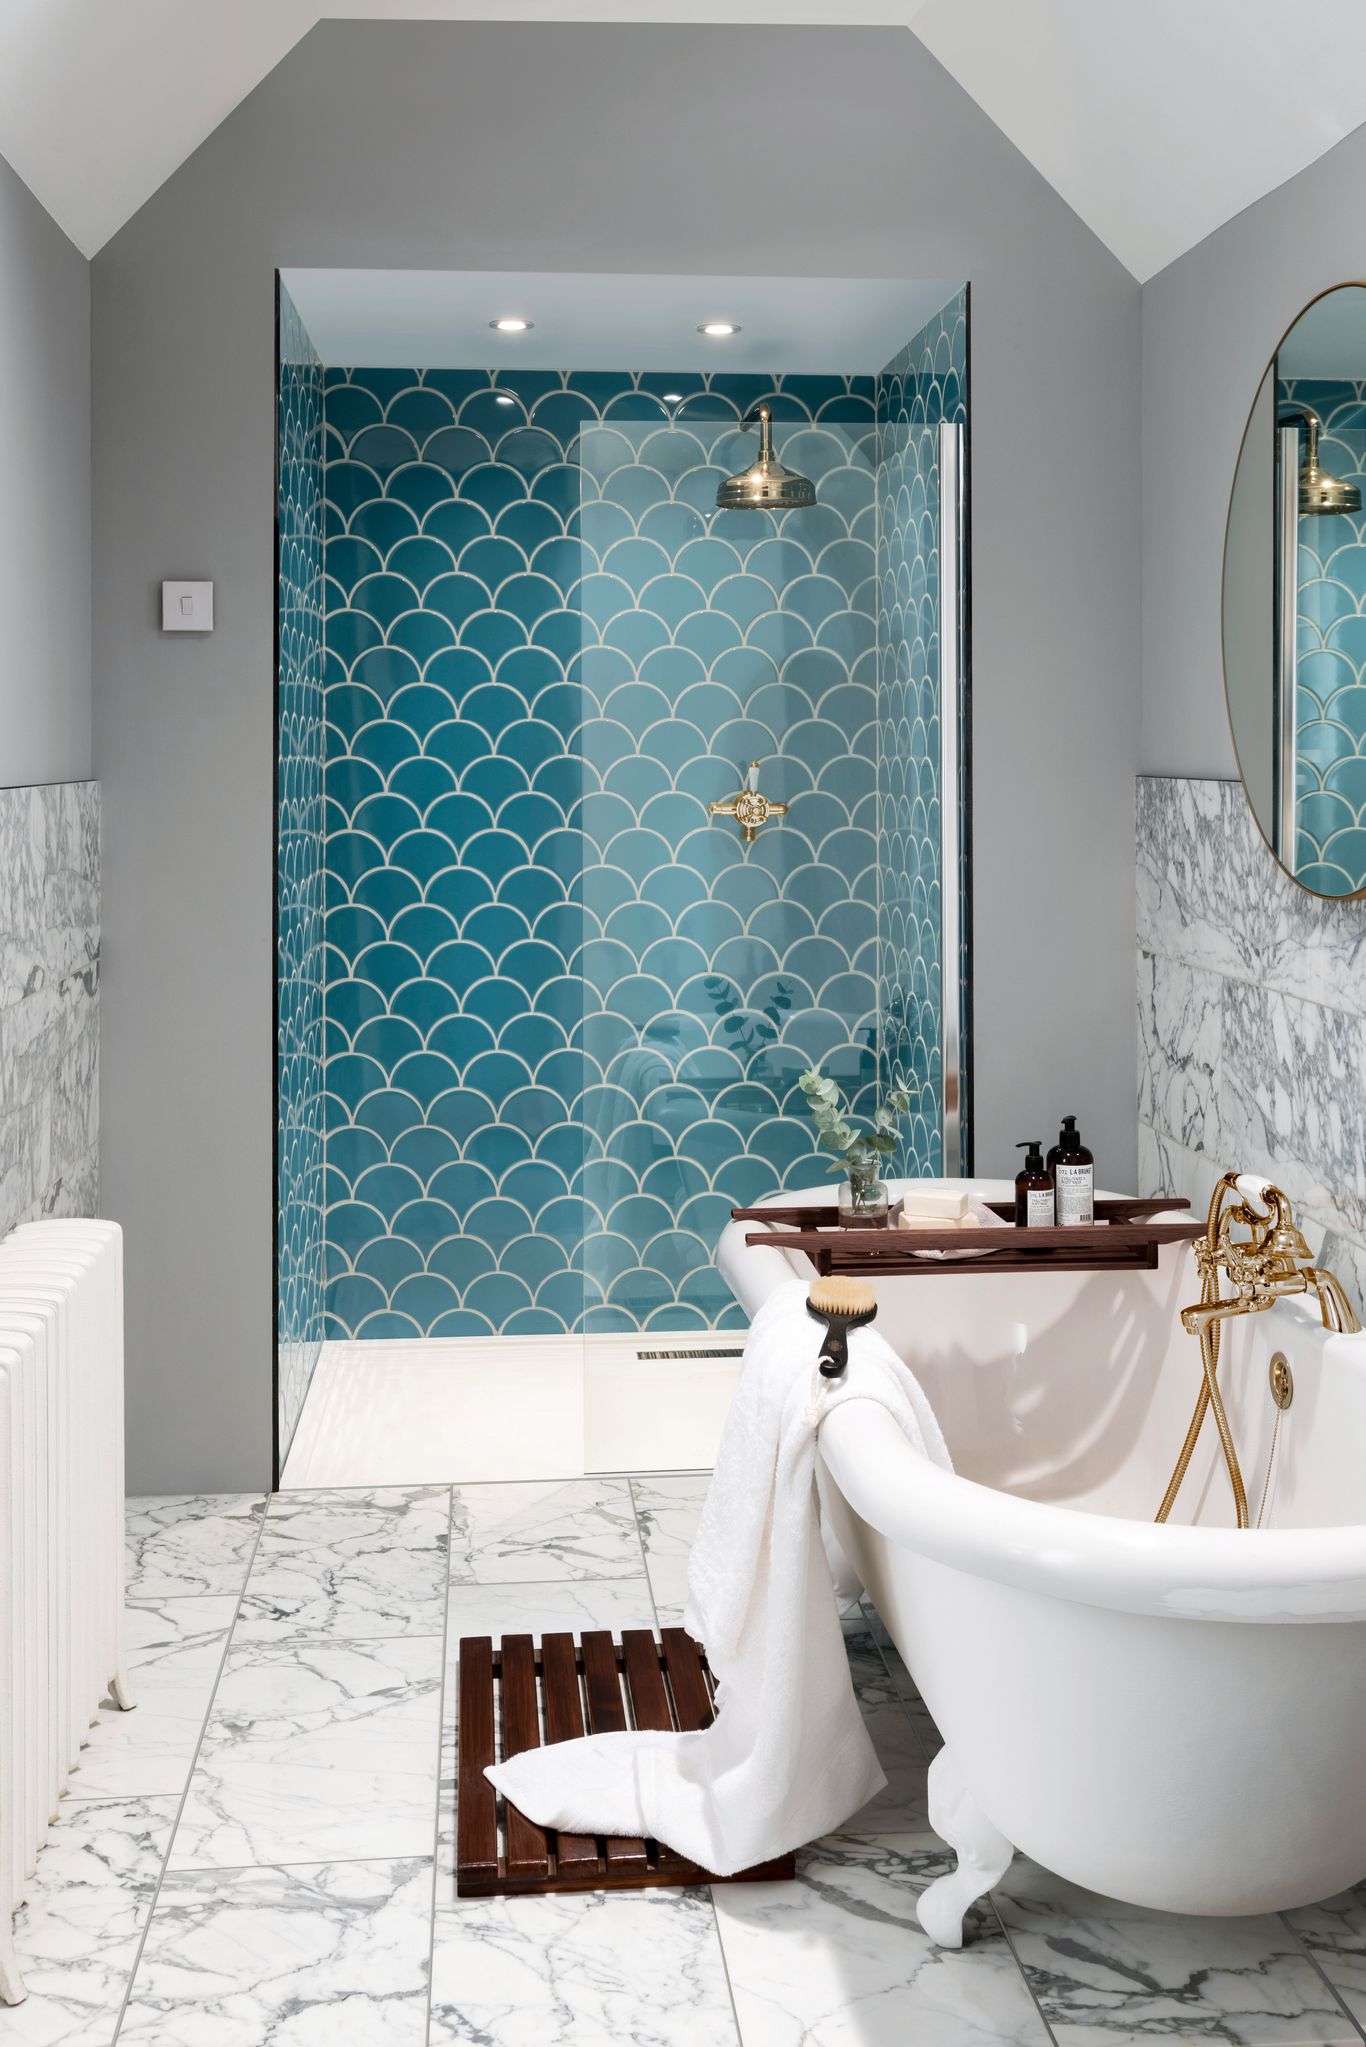 15 Small Bathroom Tile Ideas – Stylish Ways To Make Your Space Feel